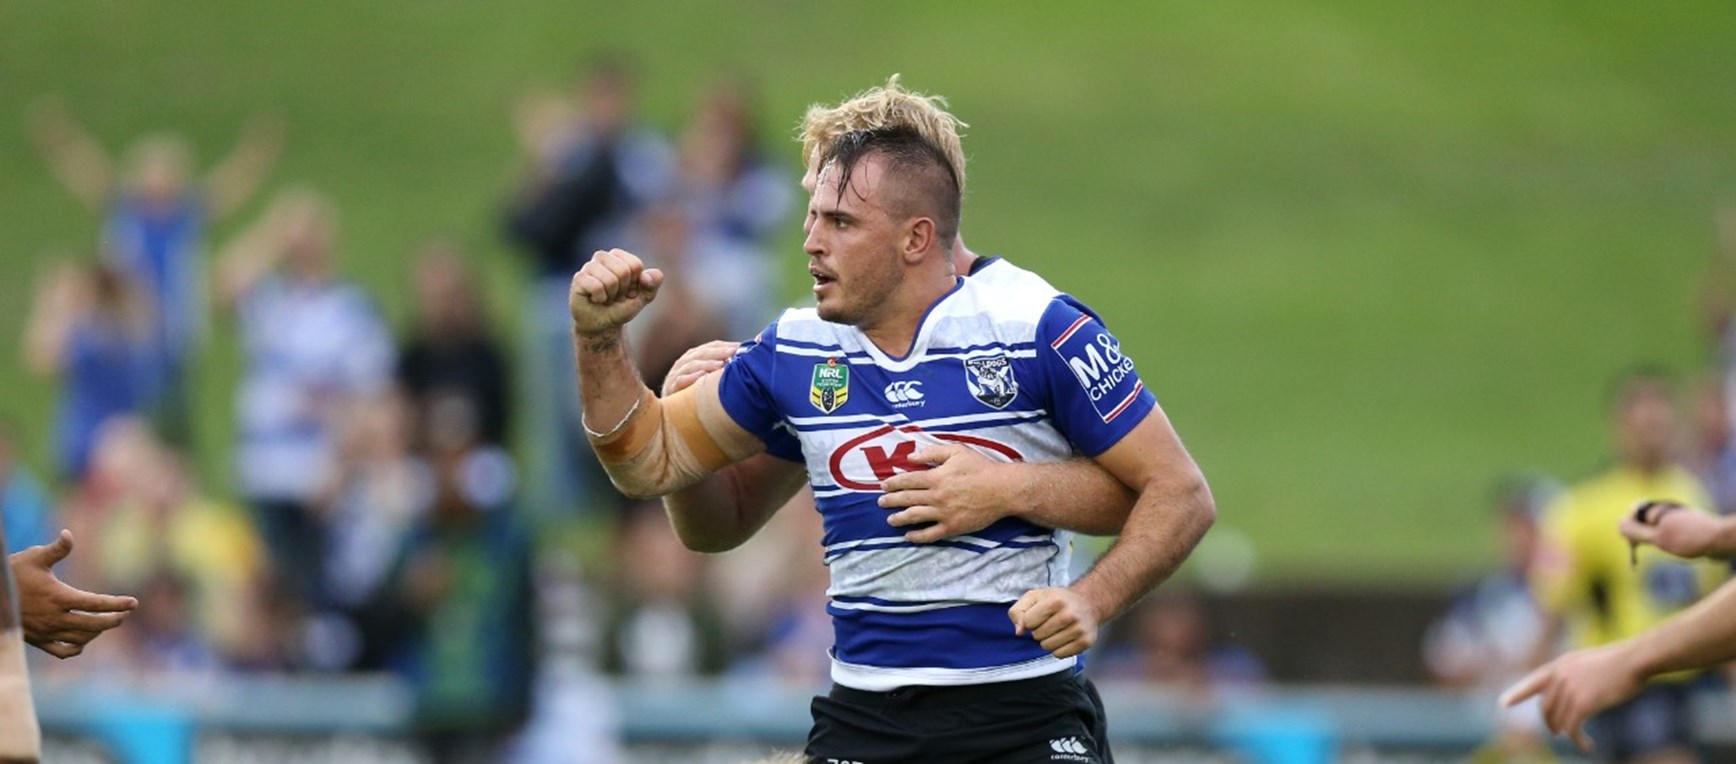 GALLERY: Reynolds in action at Belmore